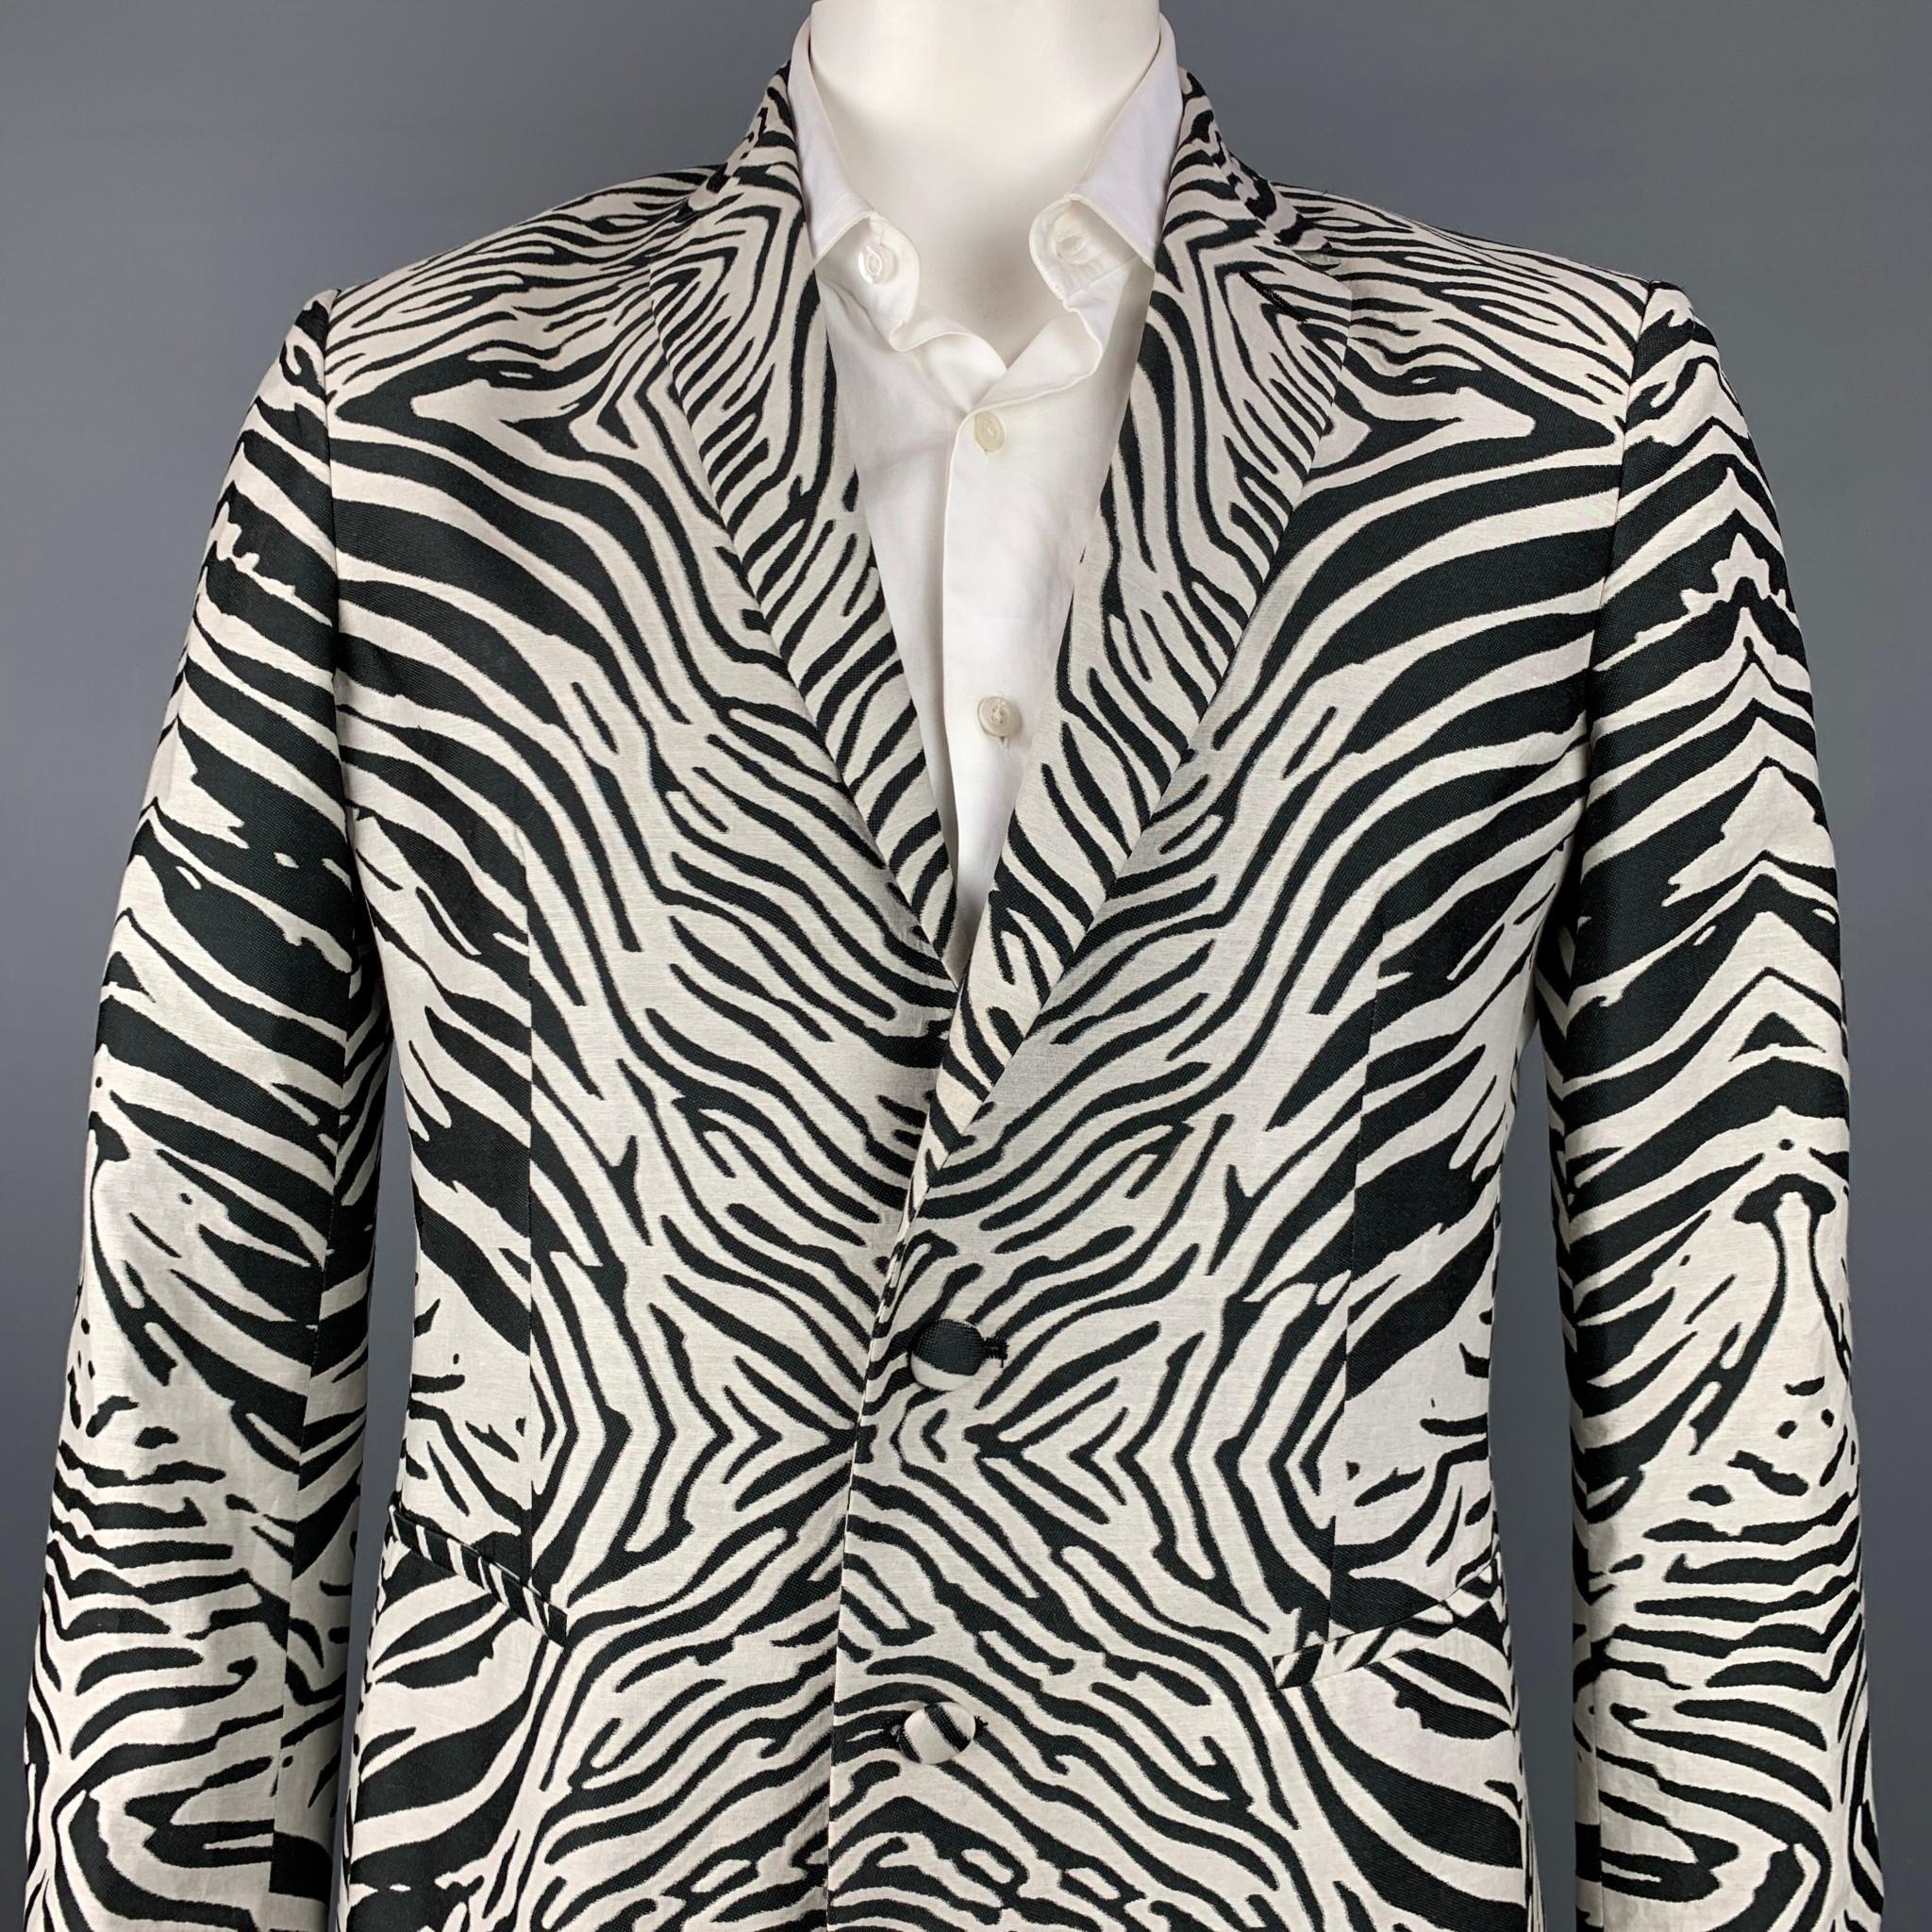 ROBERTO CAVALLI sport coat comes in a black & white zebra print polyester with a full liner featuring a notch lapel, slit pockets, and a two button closure. Made in Italy.

Very Good Pre-Owned Condition.
Marked: IT 52

Measurements:

Shoulder: 18.5